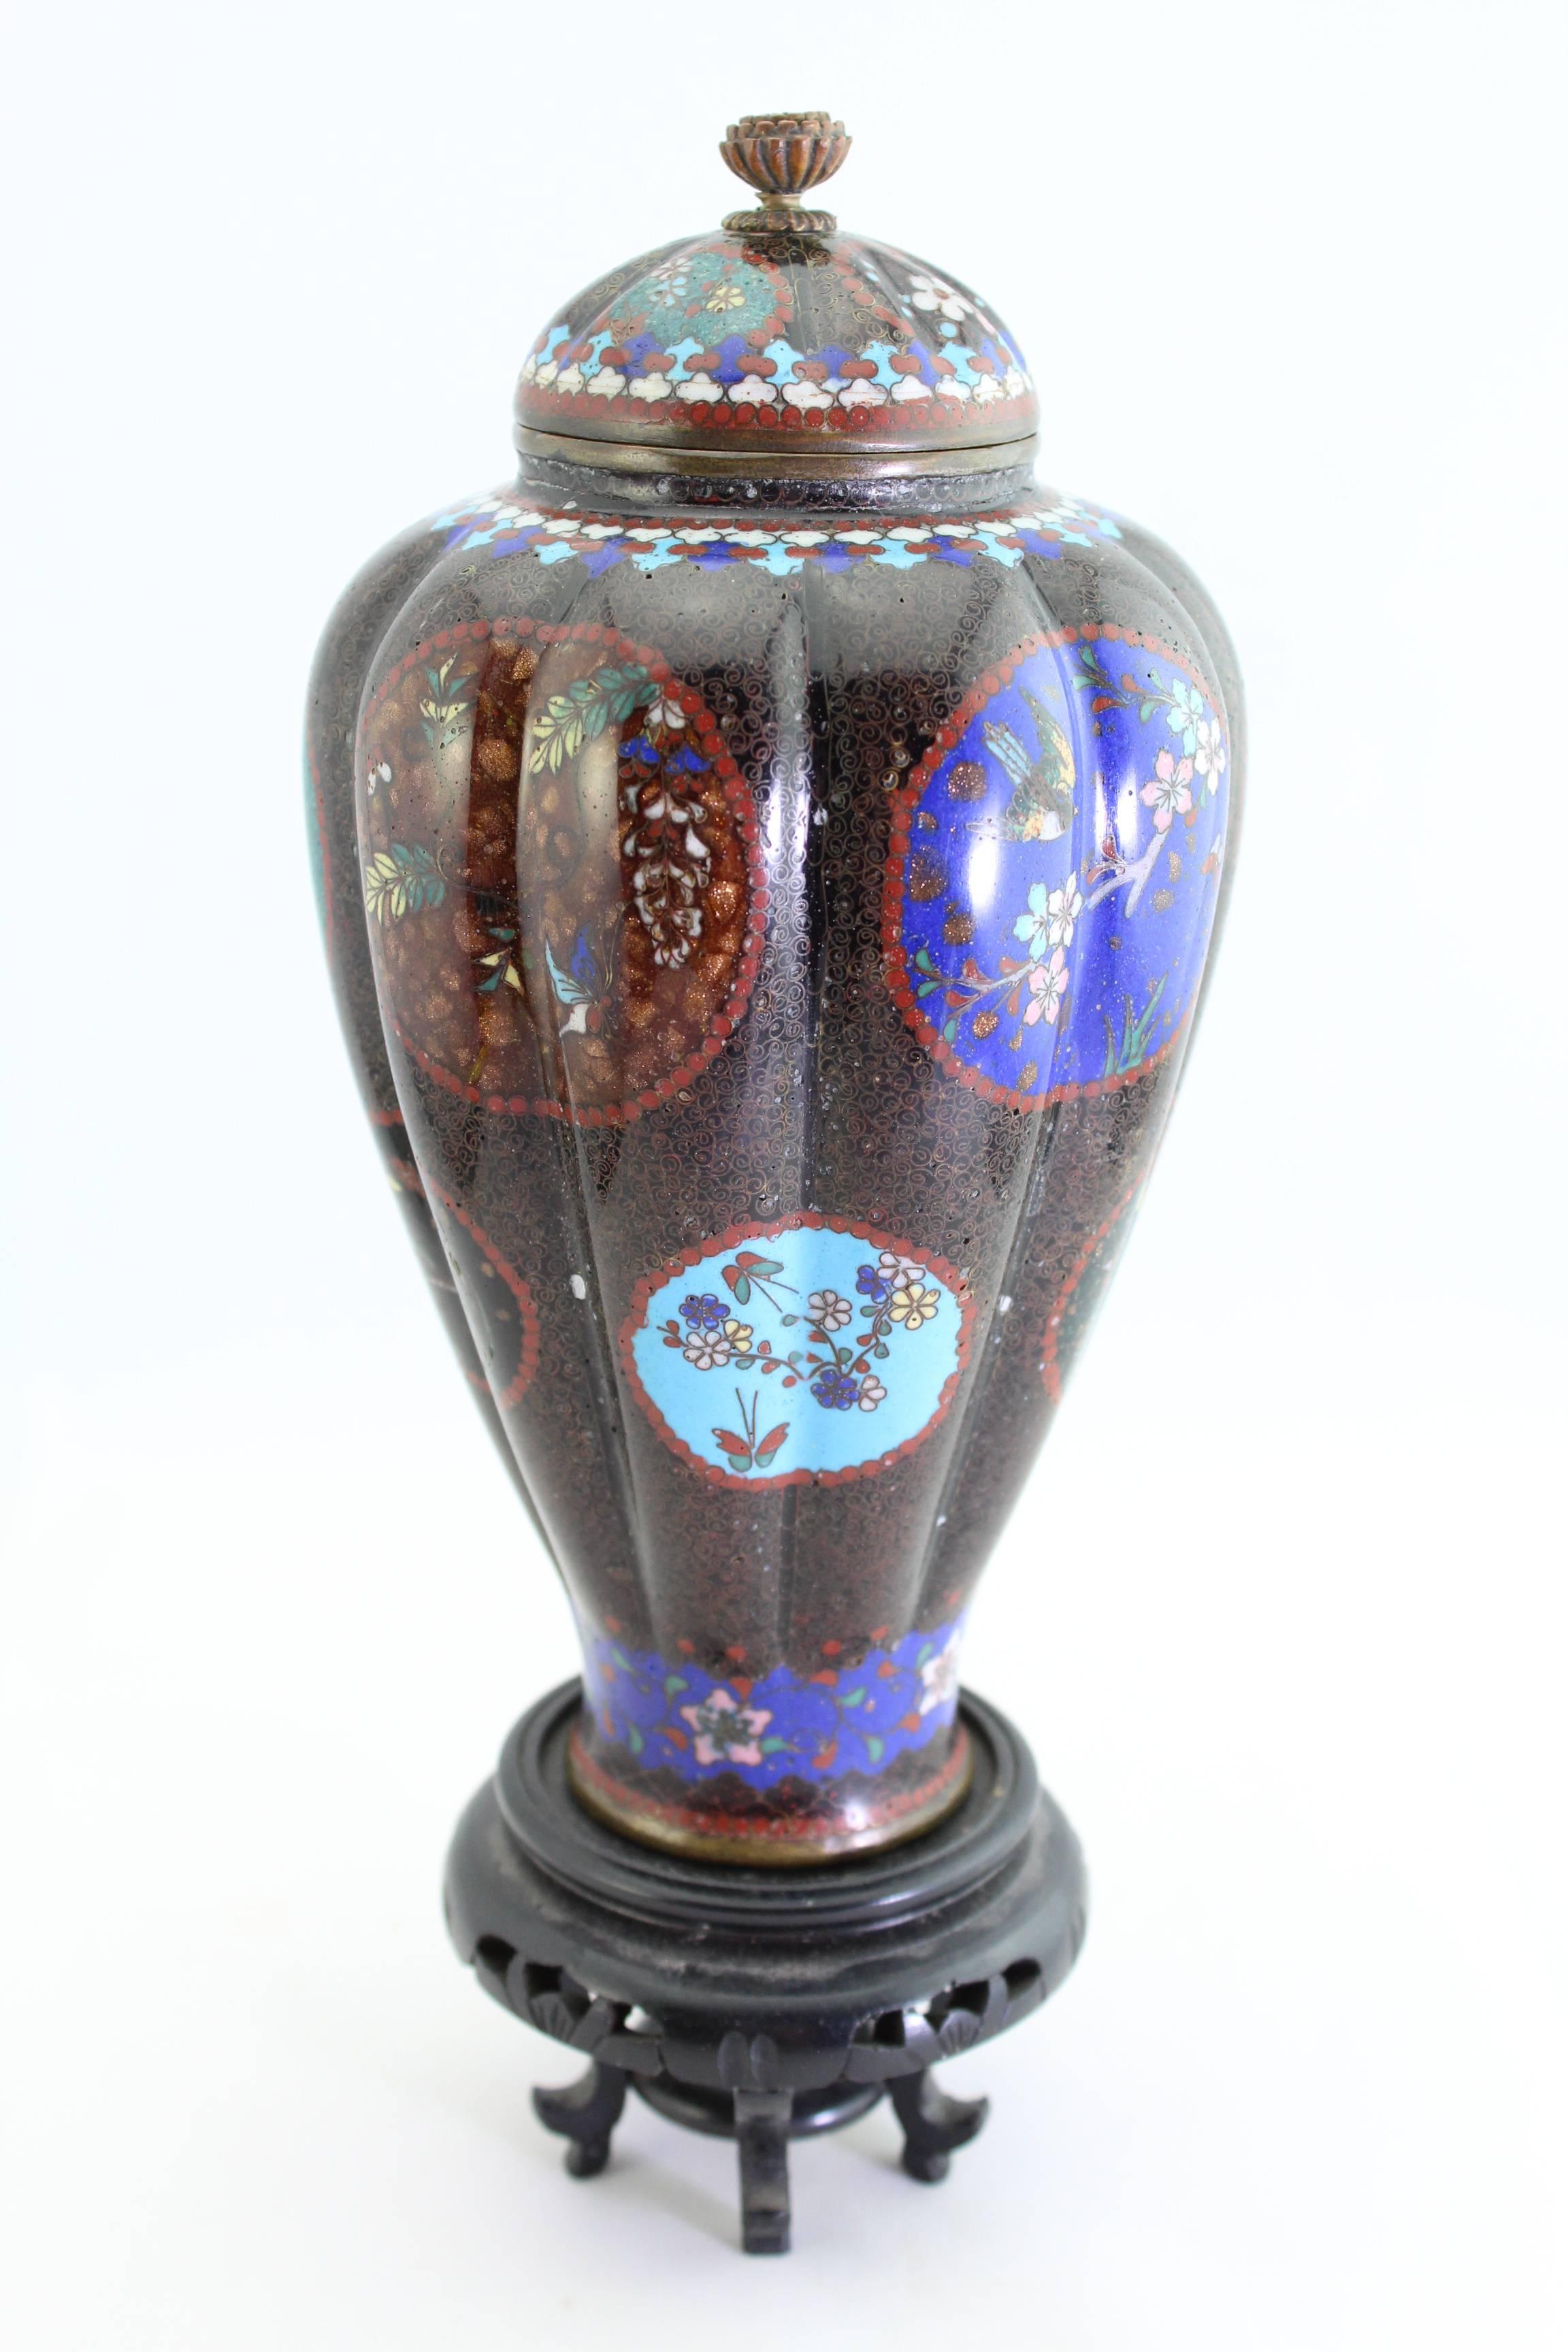 Direct from the Richard (Dick) Bass personal collection in Fort Worth TX. The Oil Billionaire and Mountaineer adventurer; First man ever complete the Seven Summits of the world.

A superb Meiji-era cloisonne vase featuring assorted flora on a black